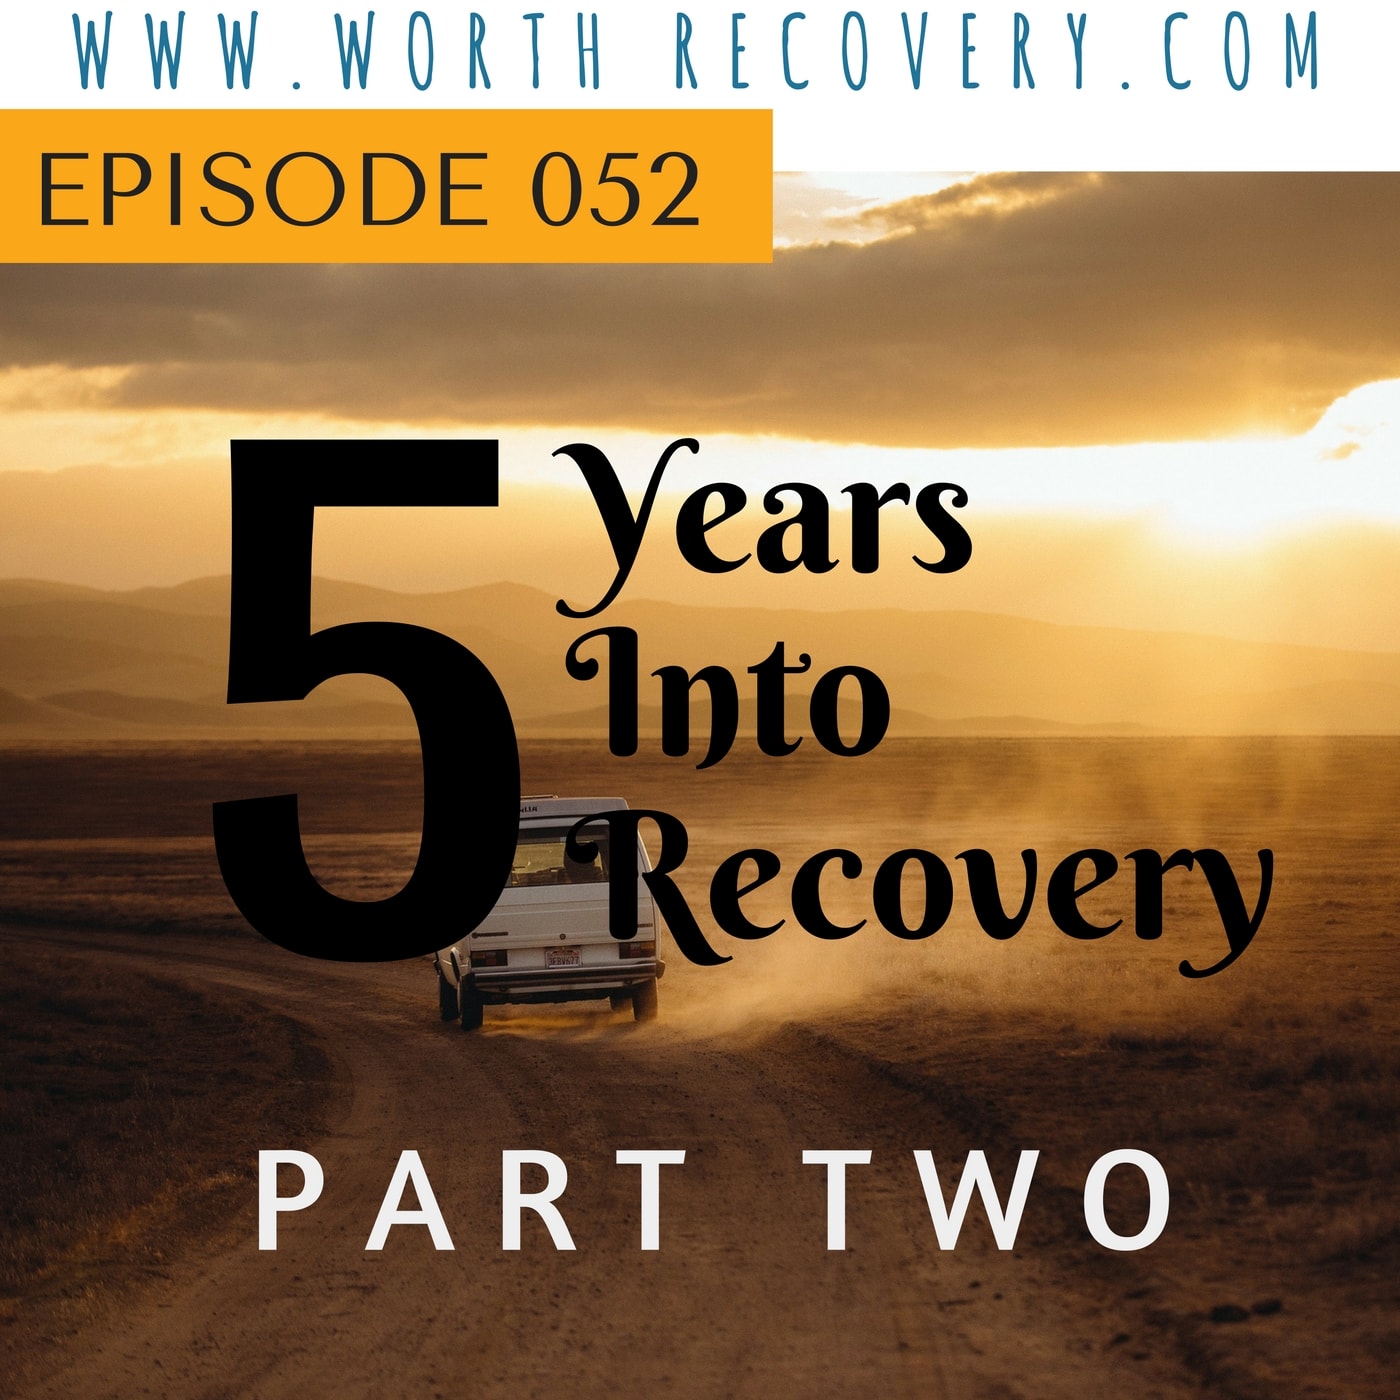 Episode 052: 5 Years Into Recovery, Part 2